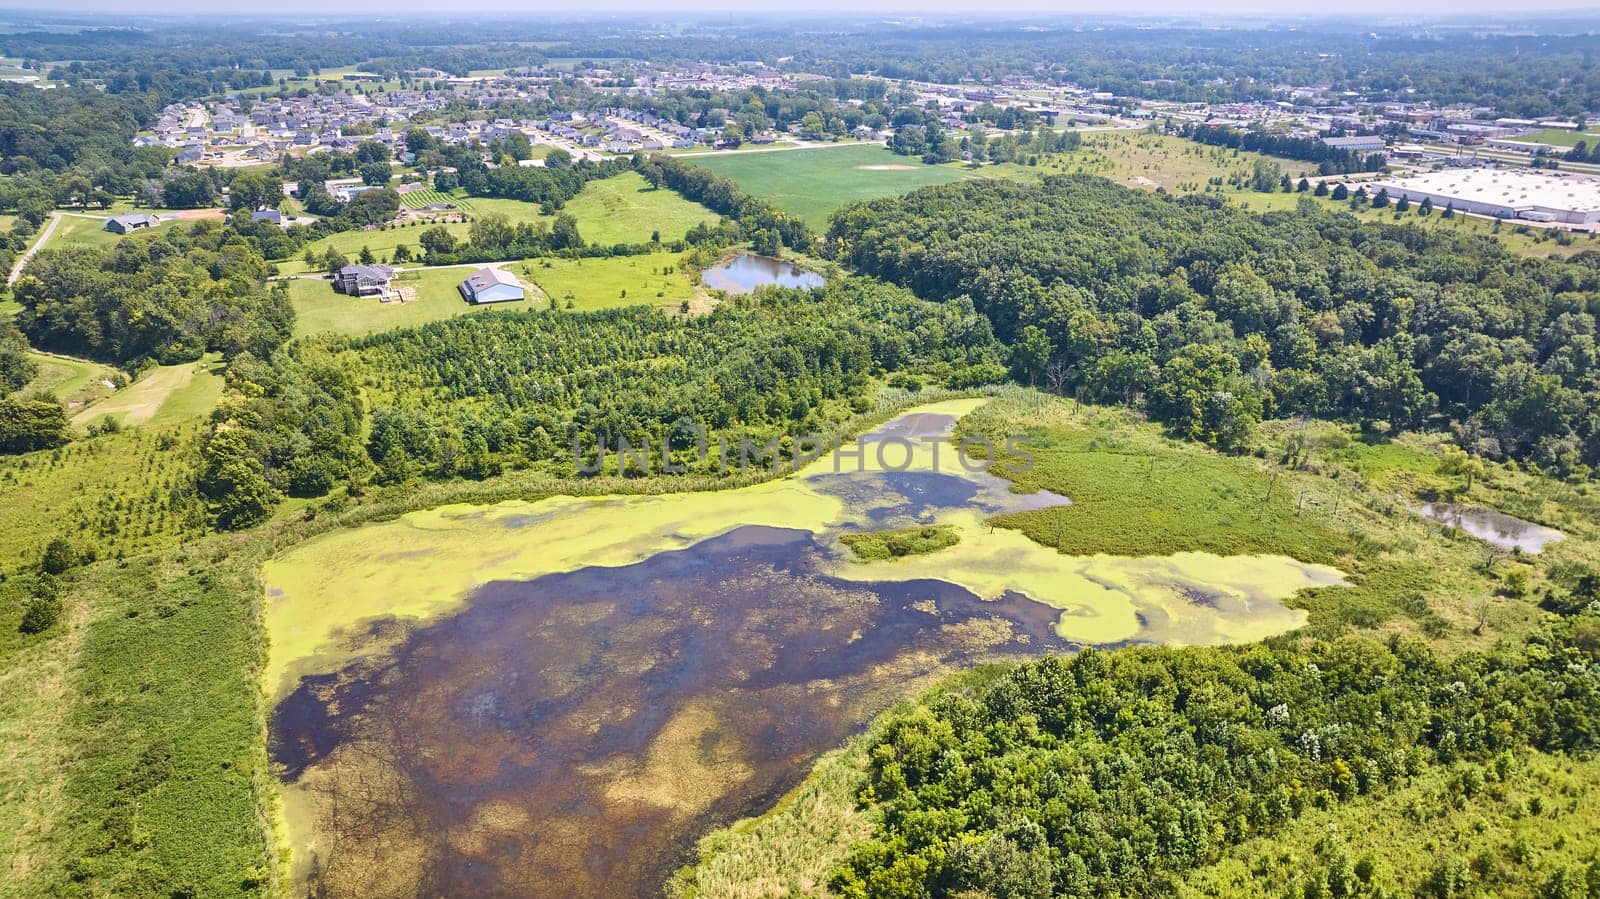 Image of Swamp land with green algae bloom aerial with houses and neighborhoods further away